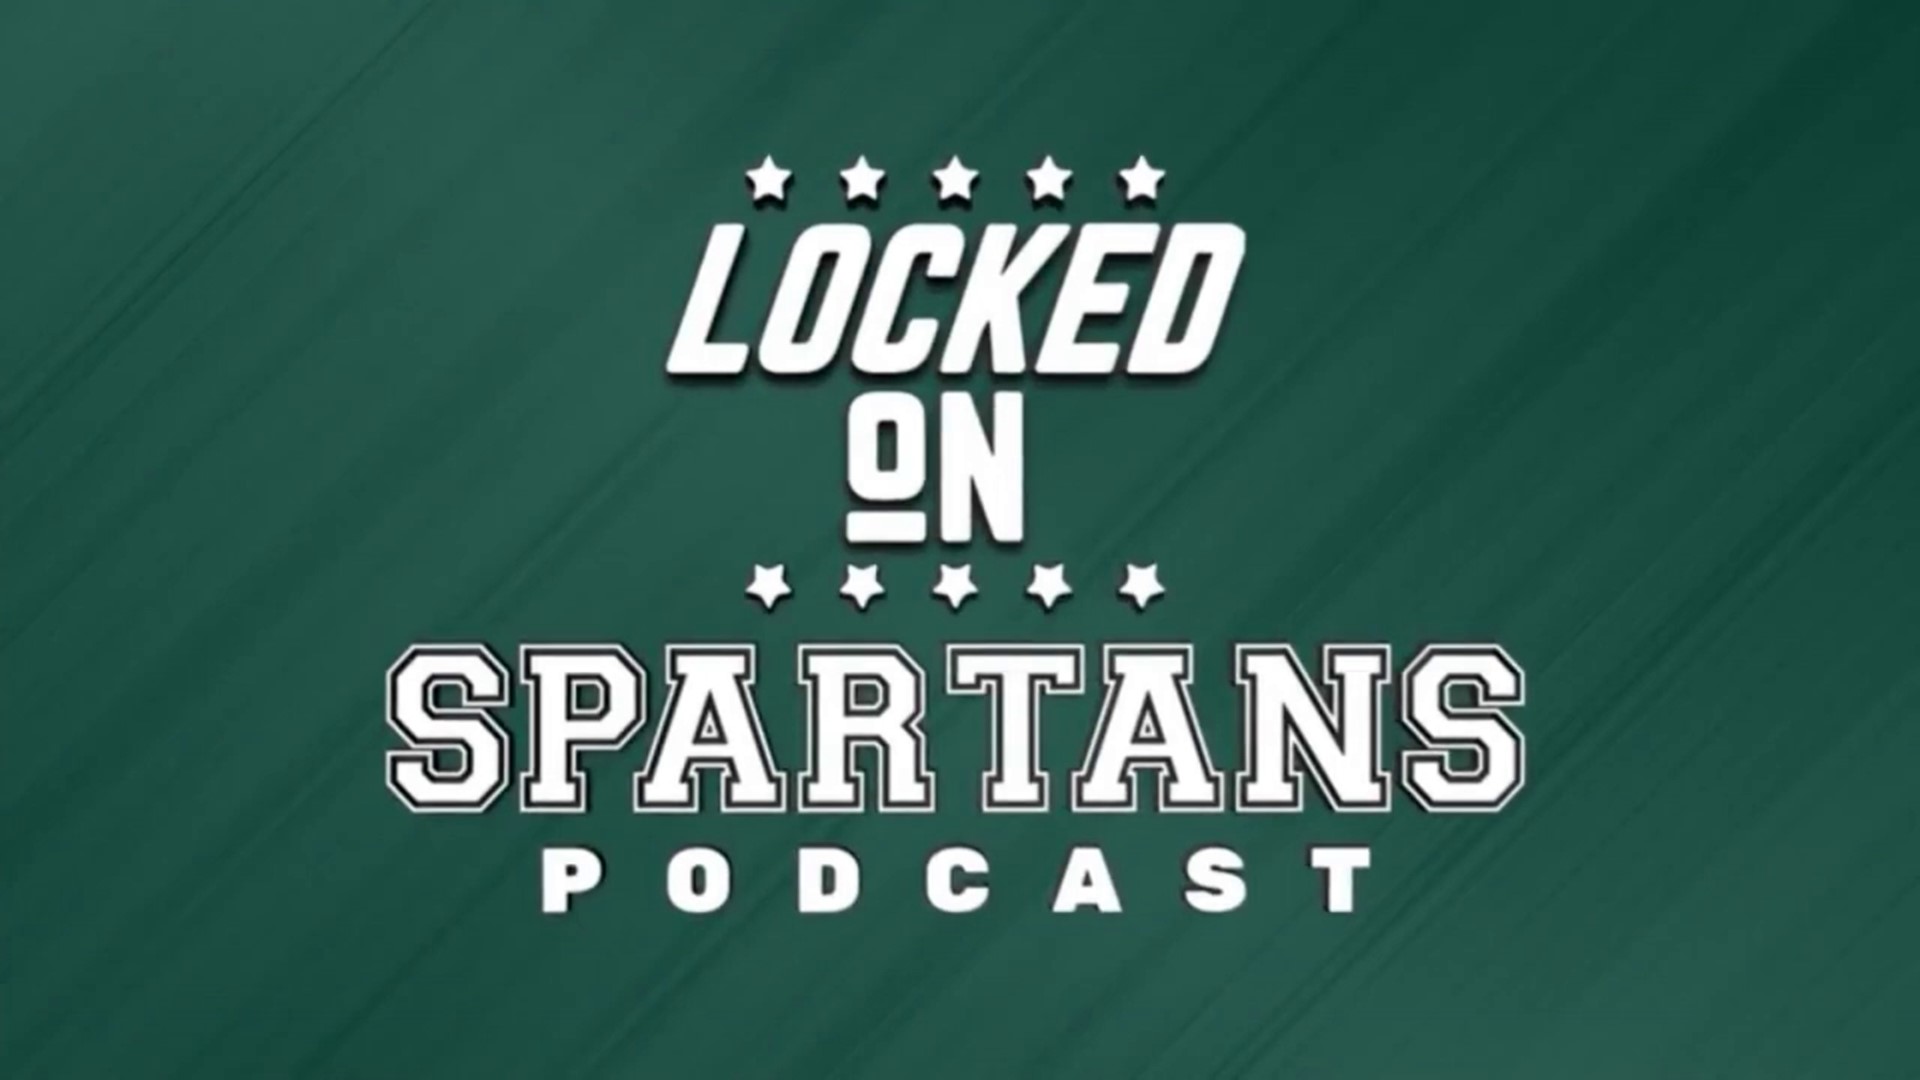 Part two of our chat with Wil Hunter starts with a listener question on MSU offensive coordinator Jay Johnson and just how hot his seat should be this season.